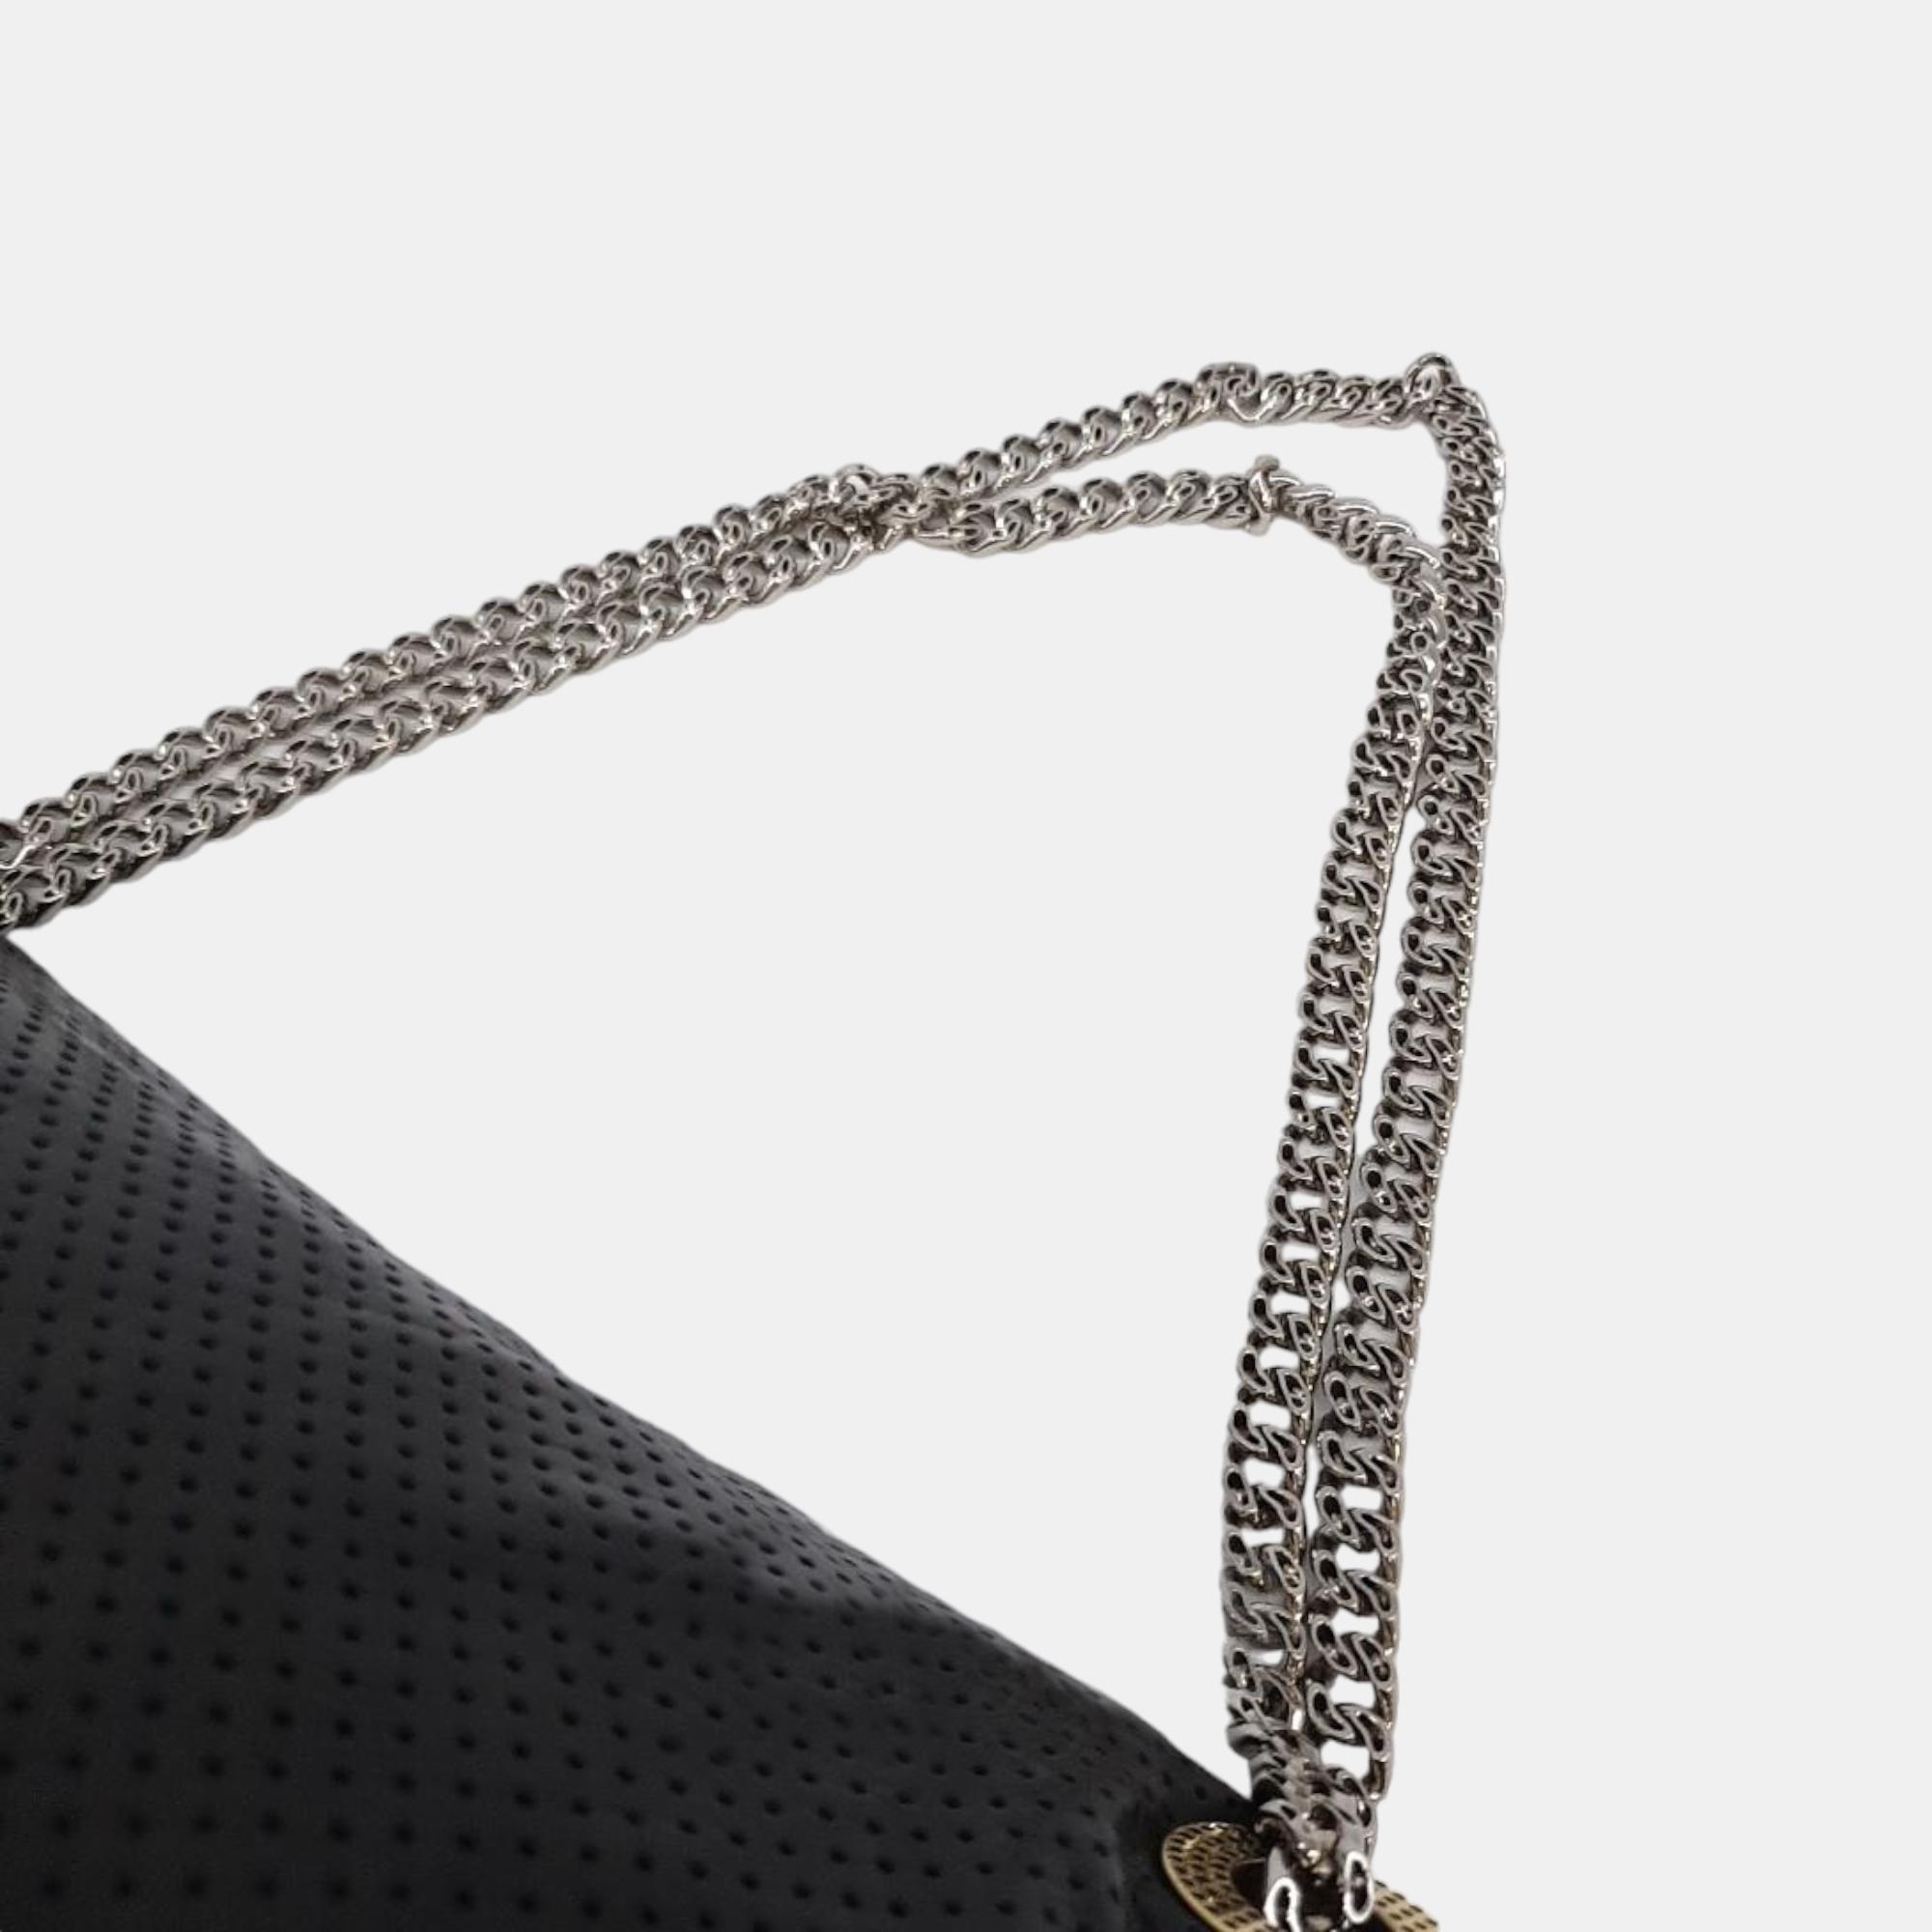 Chanel Black Perforated Leather Chain Shoulder Bag